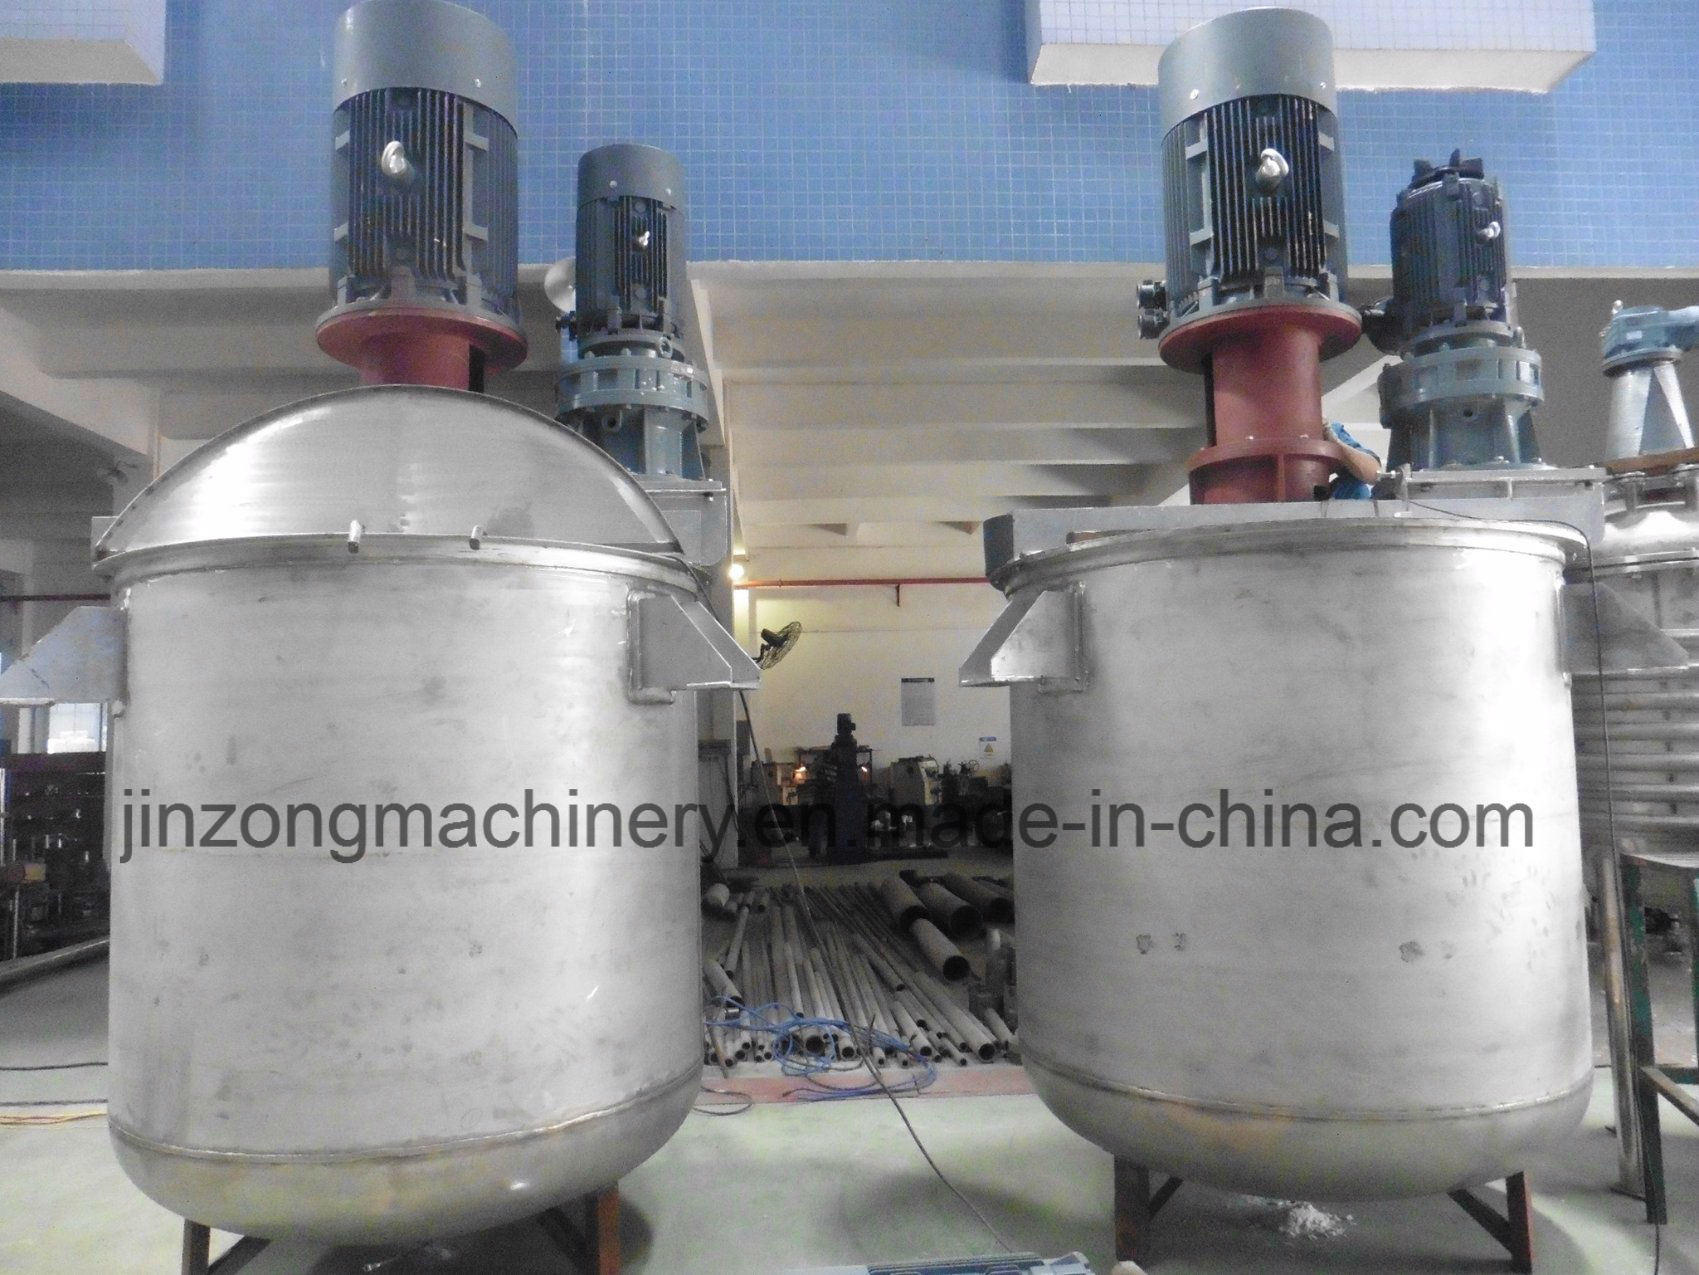 Mixing Tank with Dispersering and Stirring Blade for Industry Paint/Coating